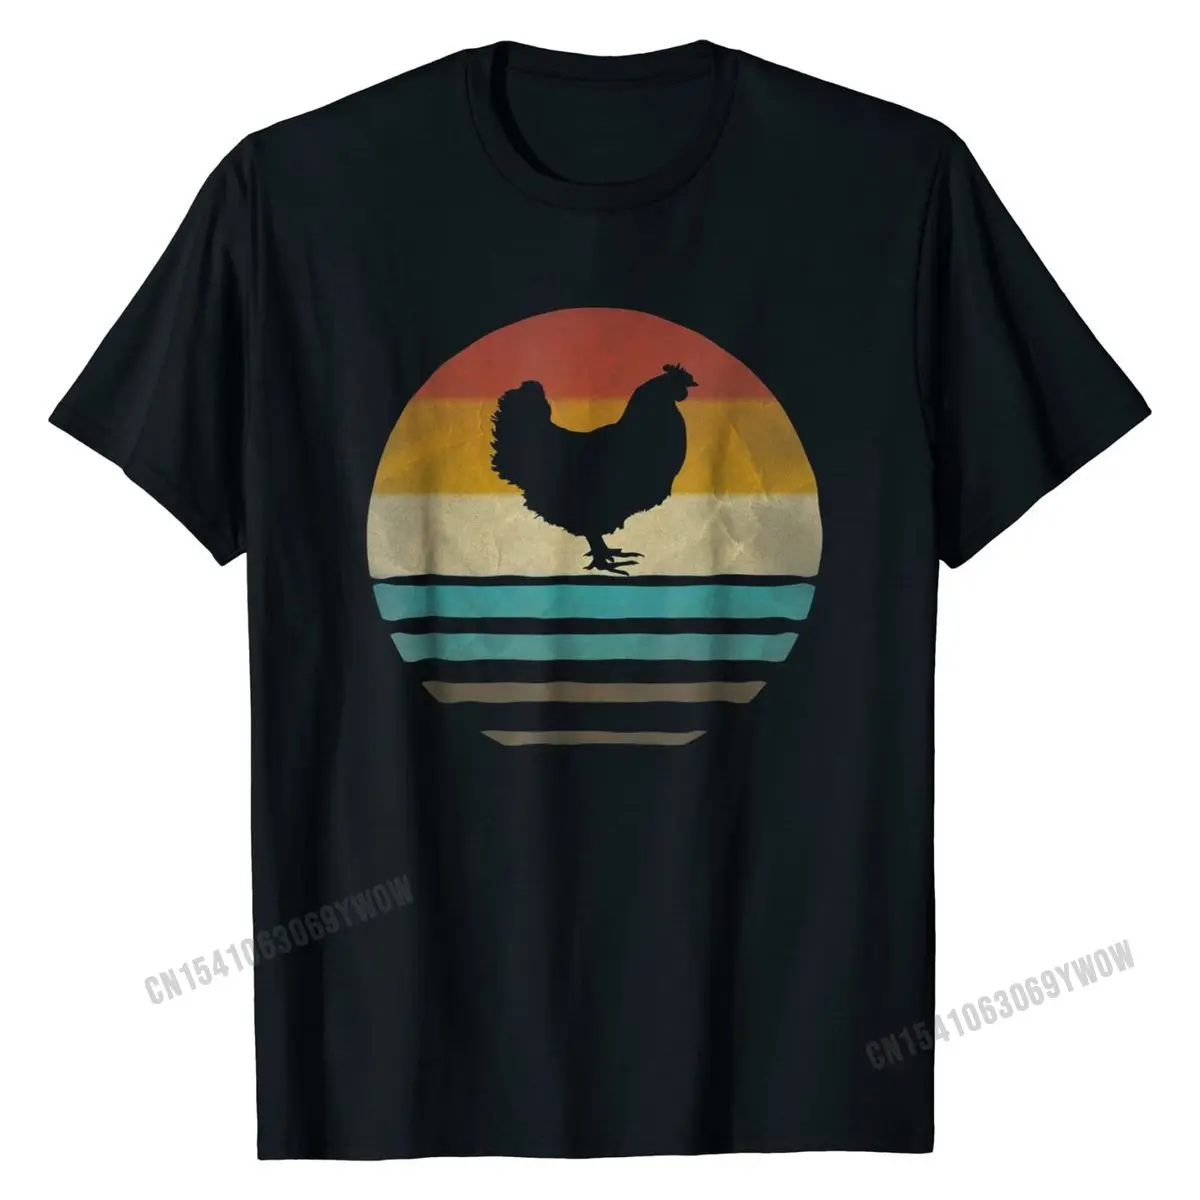 

Retro Vintage Chicken Shirt Funny Farm Poultry Farmer Gift Cotton Group Tops Tees Fashion Men T Shirt Party